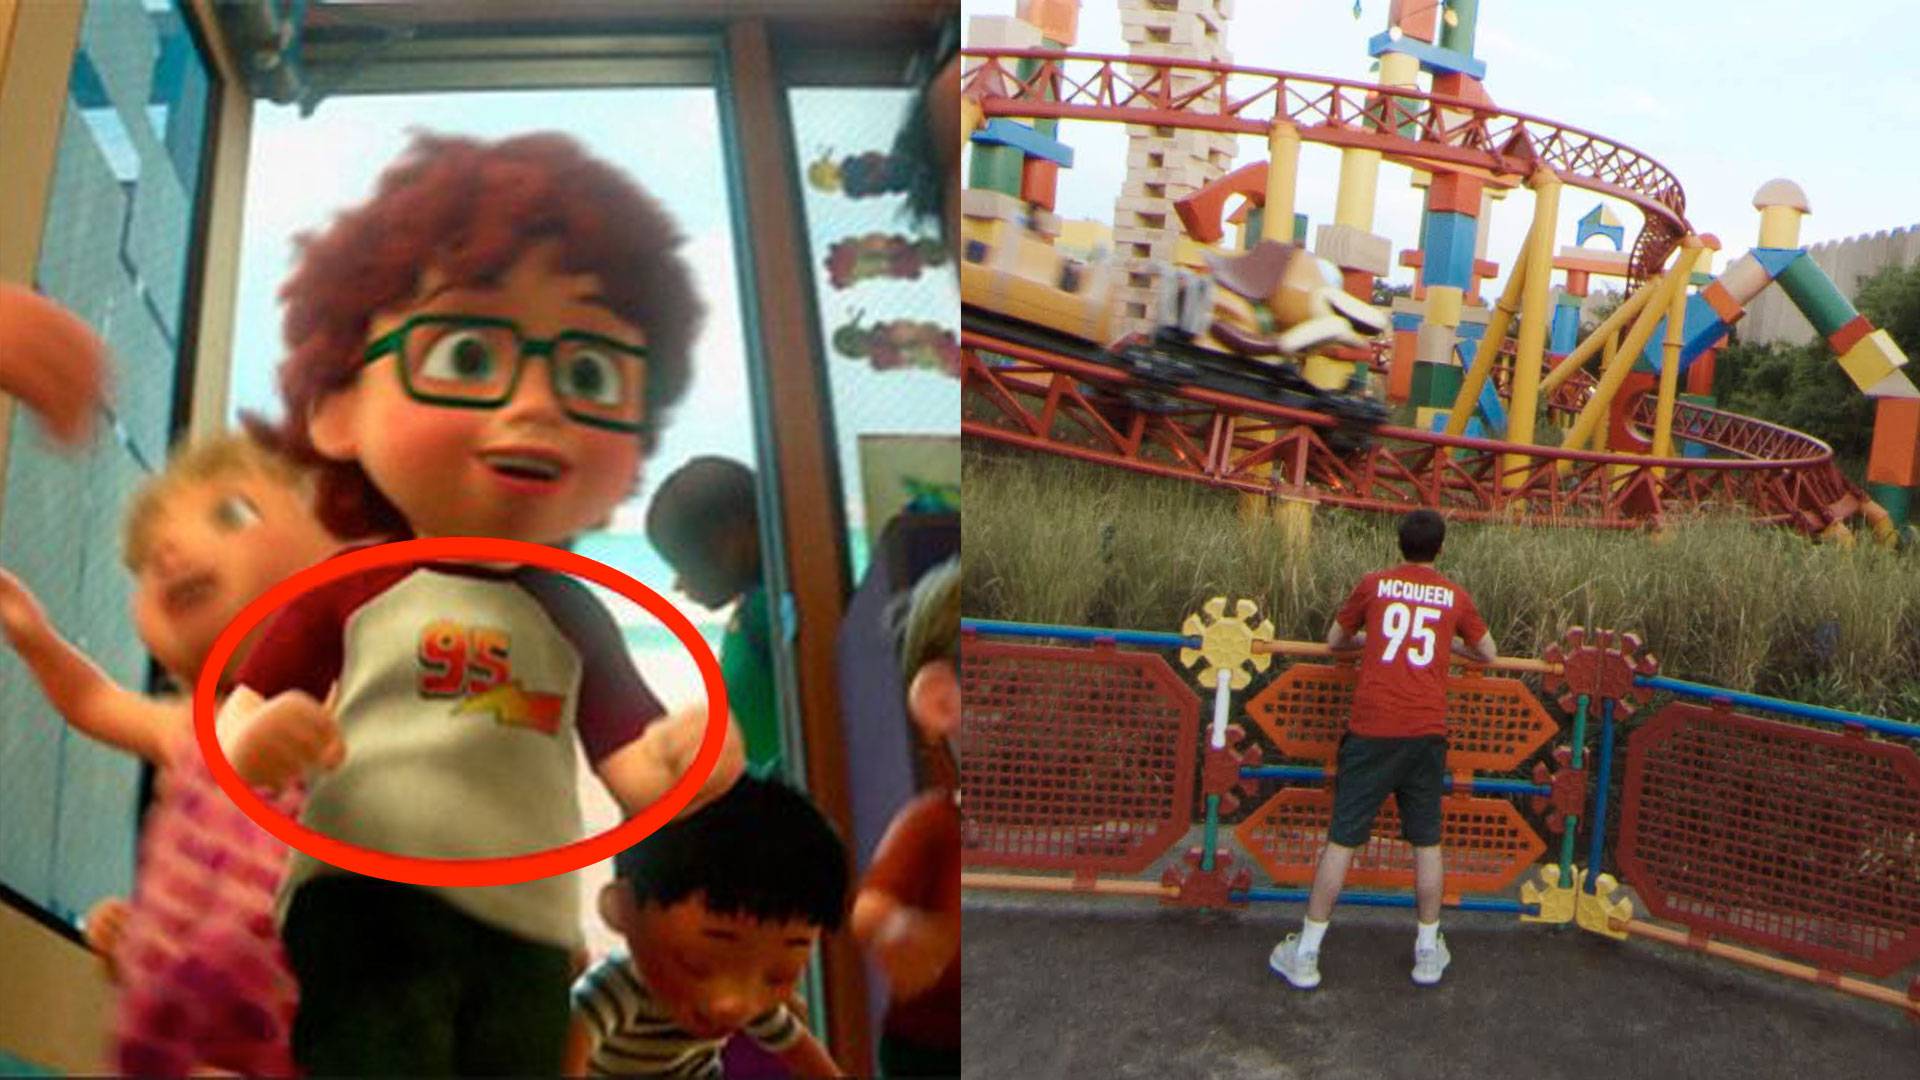 PHOTOS - Hidden Easter Eggs in Google Street View of Toy Story Land